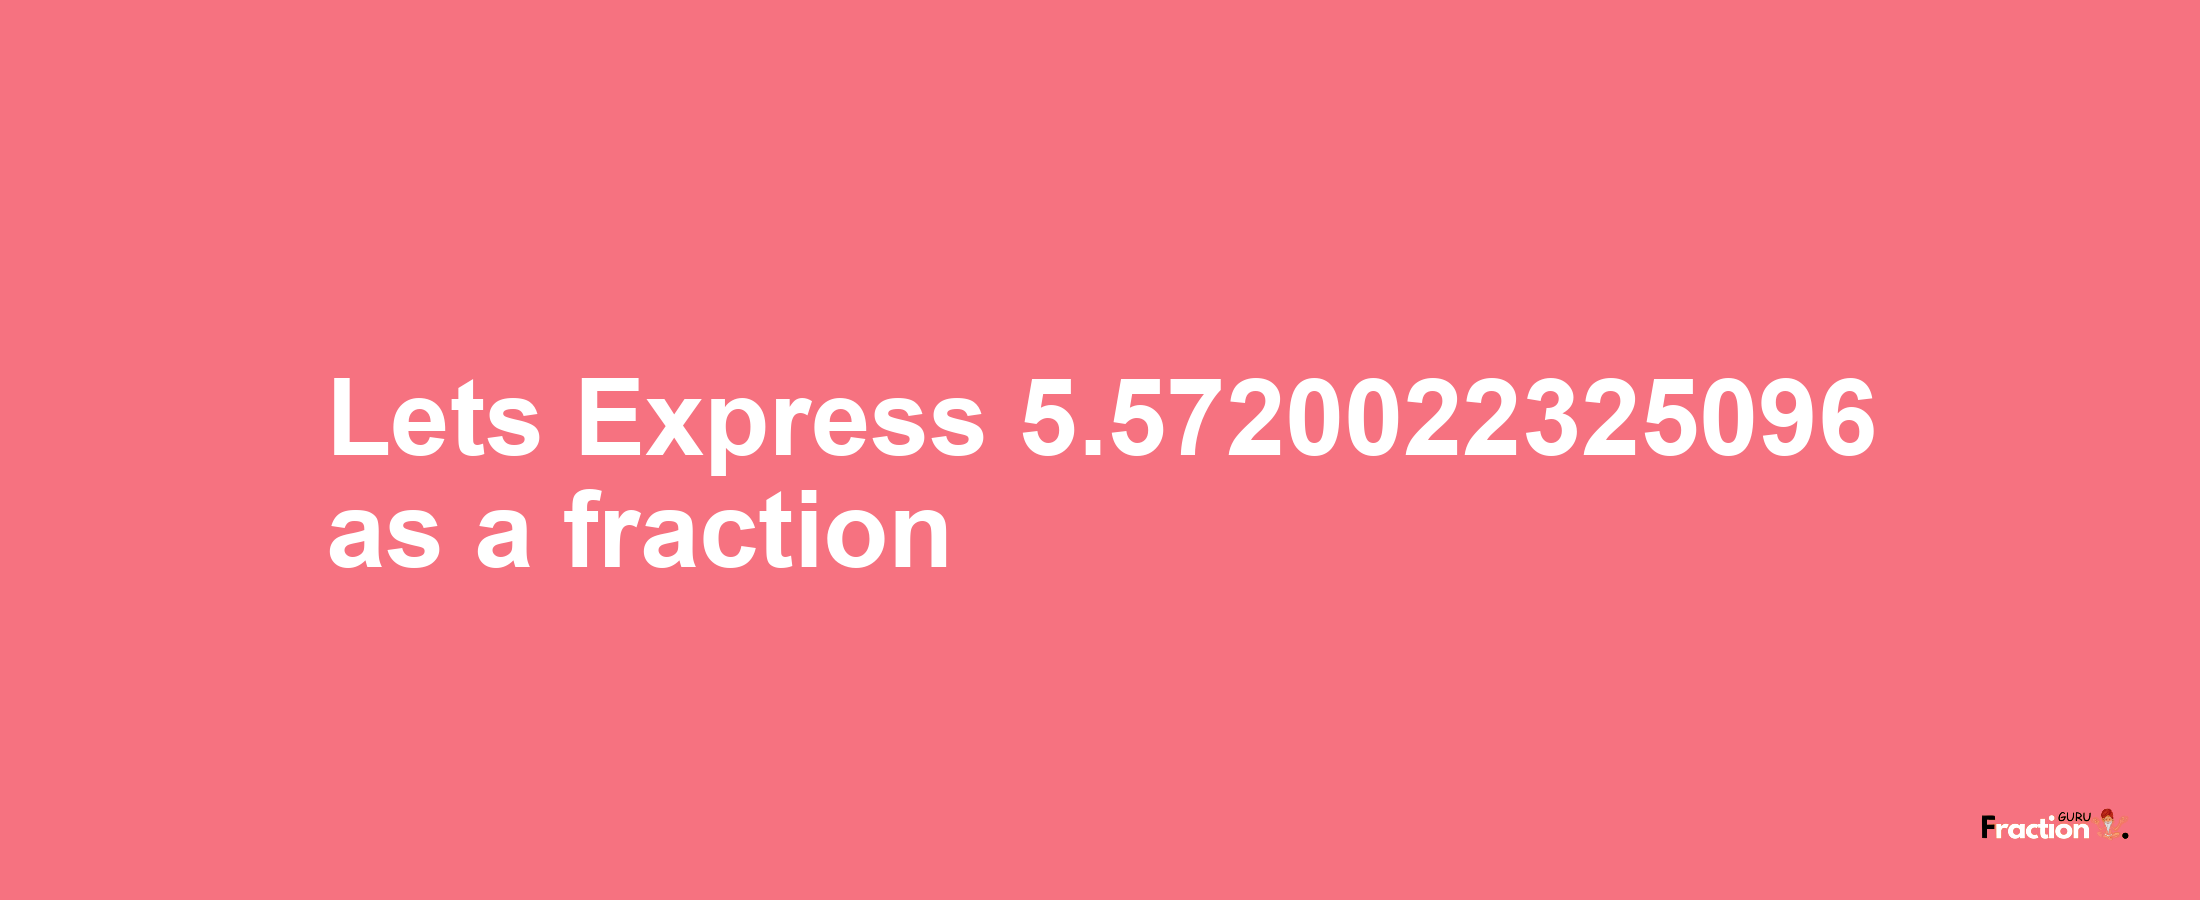 Lets Express 5.5720022325096 as afraction